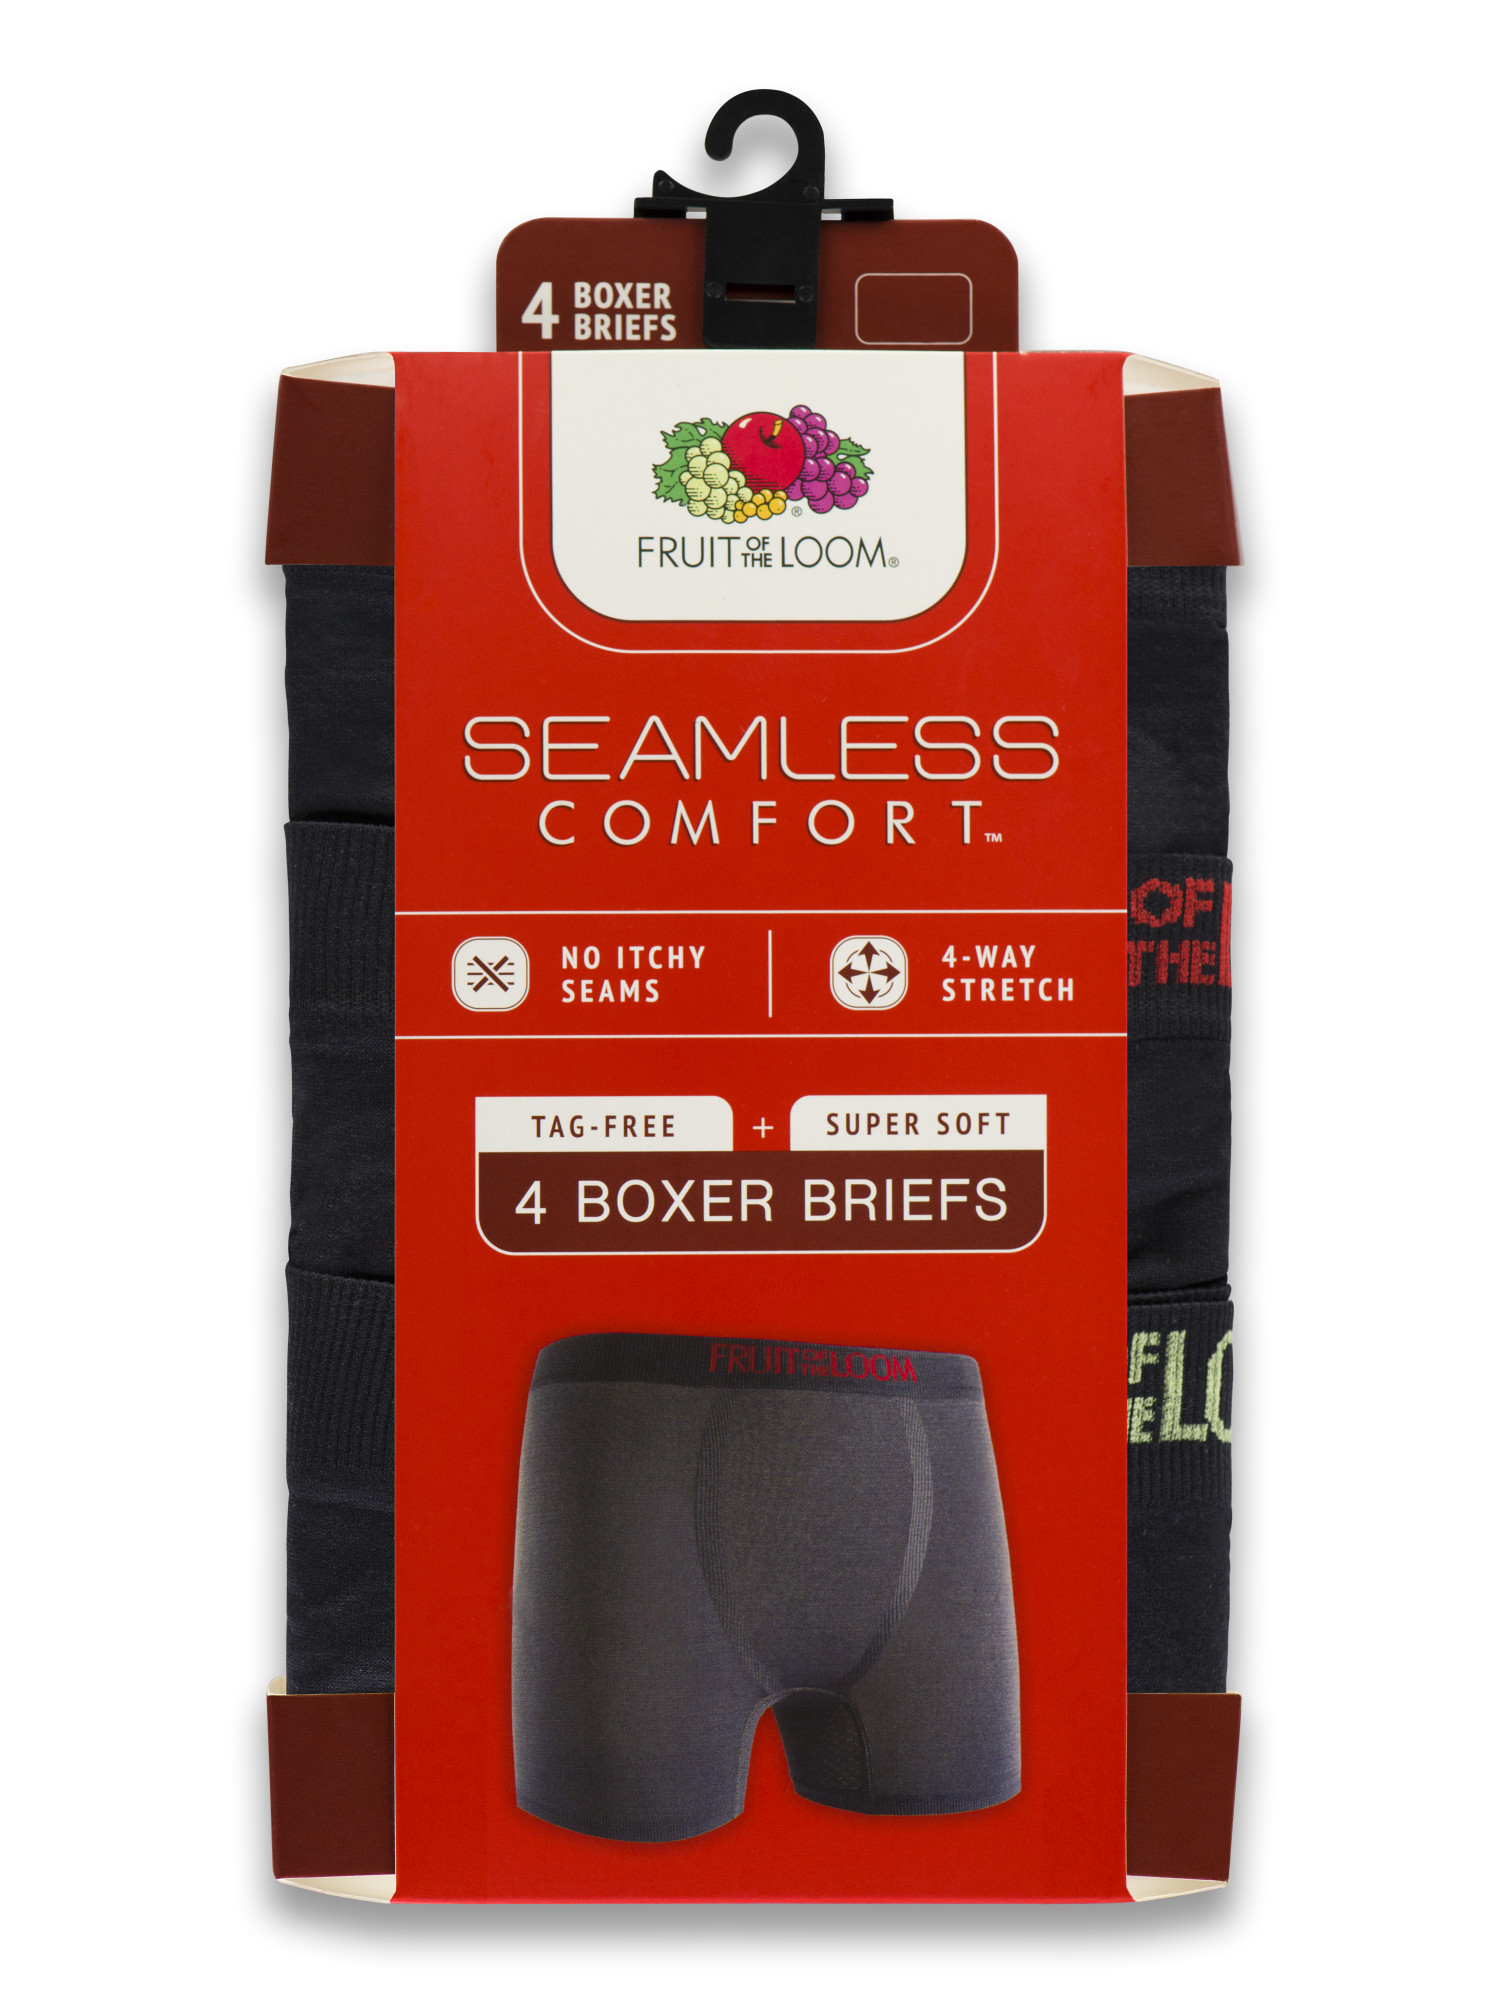 Fruit of the Loom Boys' Seamless Comfort Boxer Briefs, 4 Pack - image 3 of 5